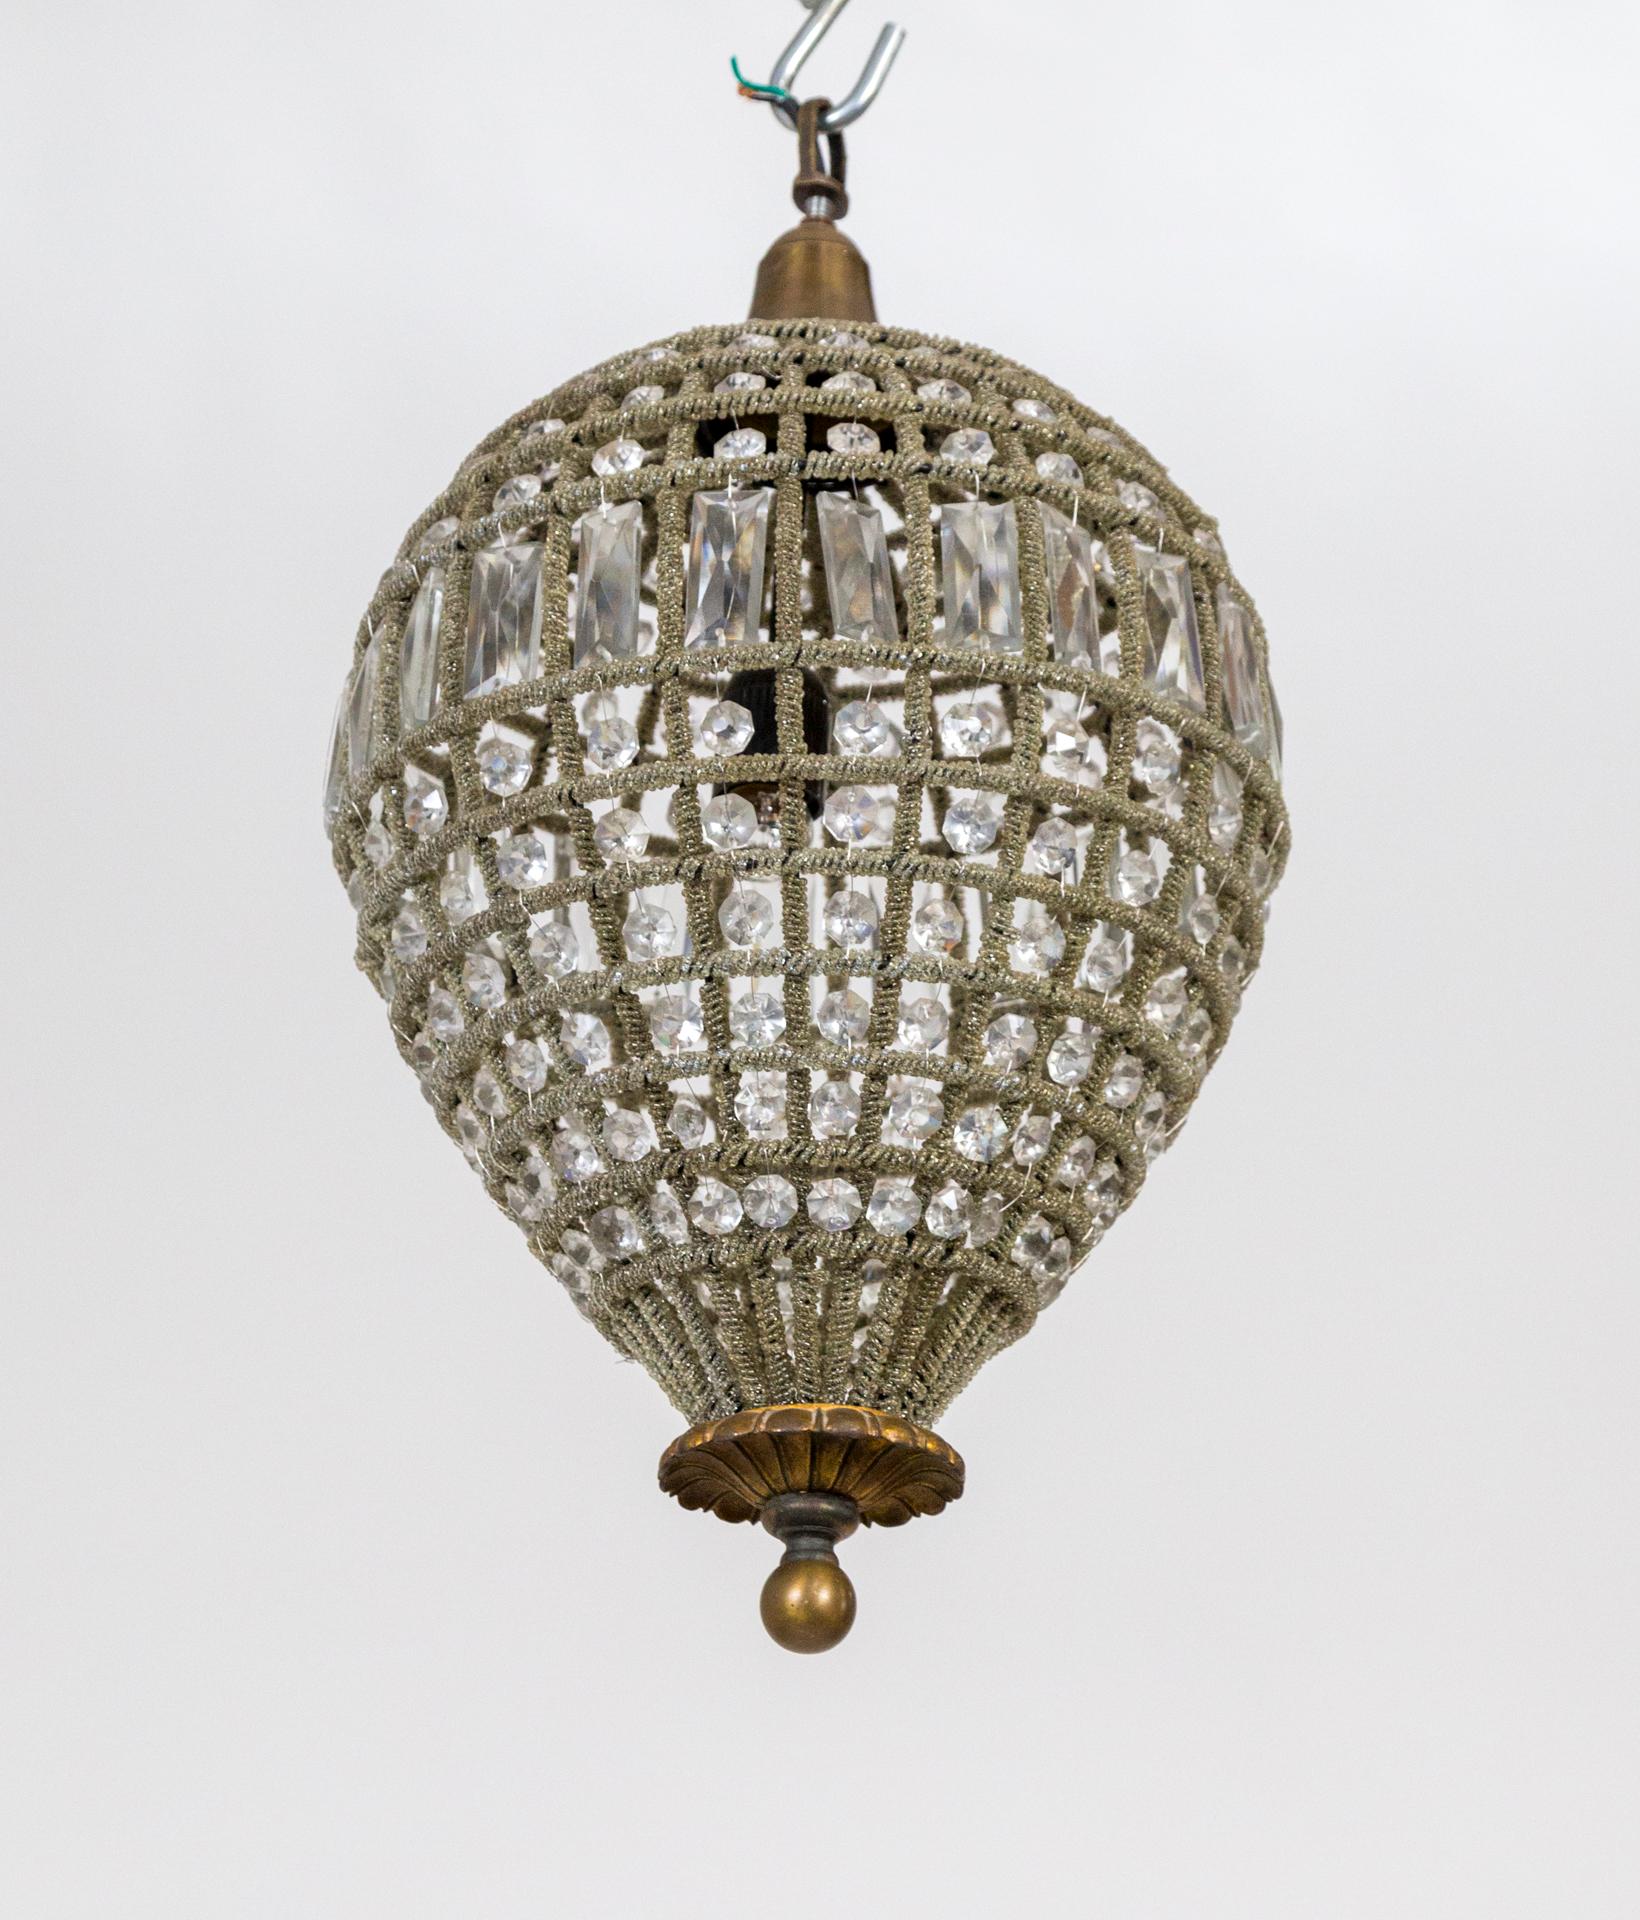 A handmade, upside down teardrop pendant with a frame completely covered in hand-sewn, metallic threads with inset crystal beads and prisms, French, 1940s. Measures: 21